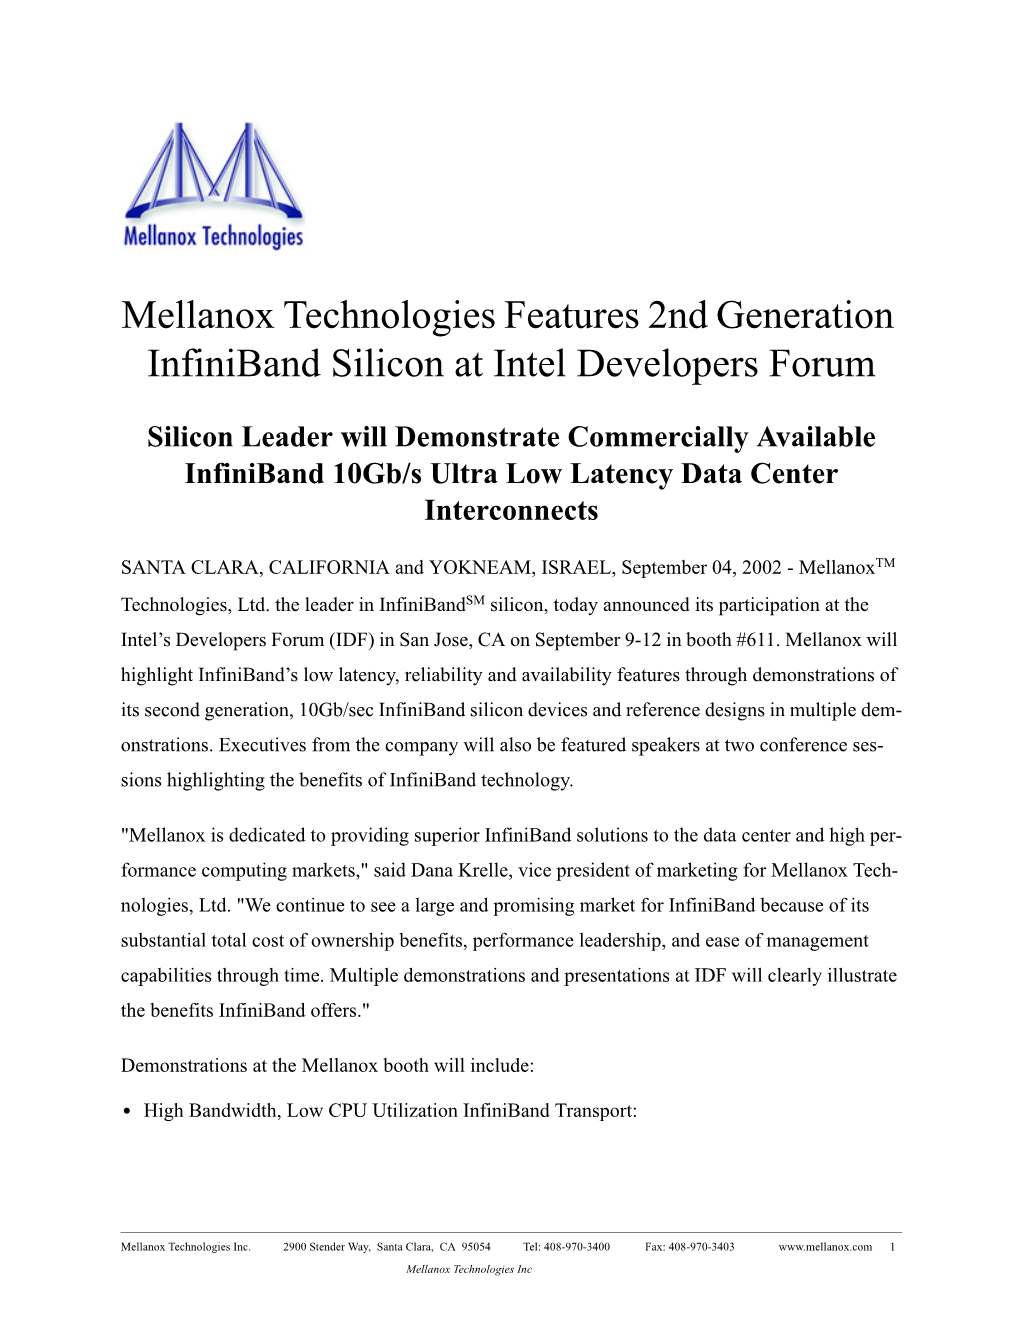 Mellanox Technologies Features 2Nd Generation Infiniband Silicon at Intel Developers Forum